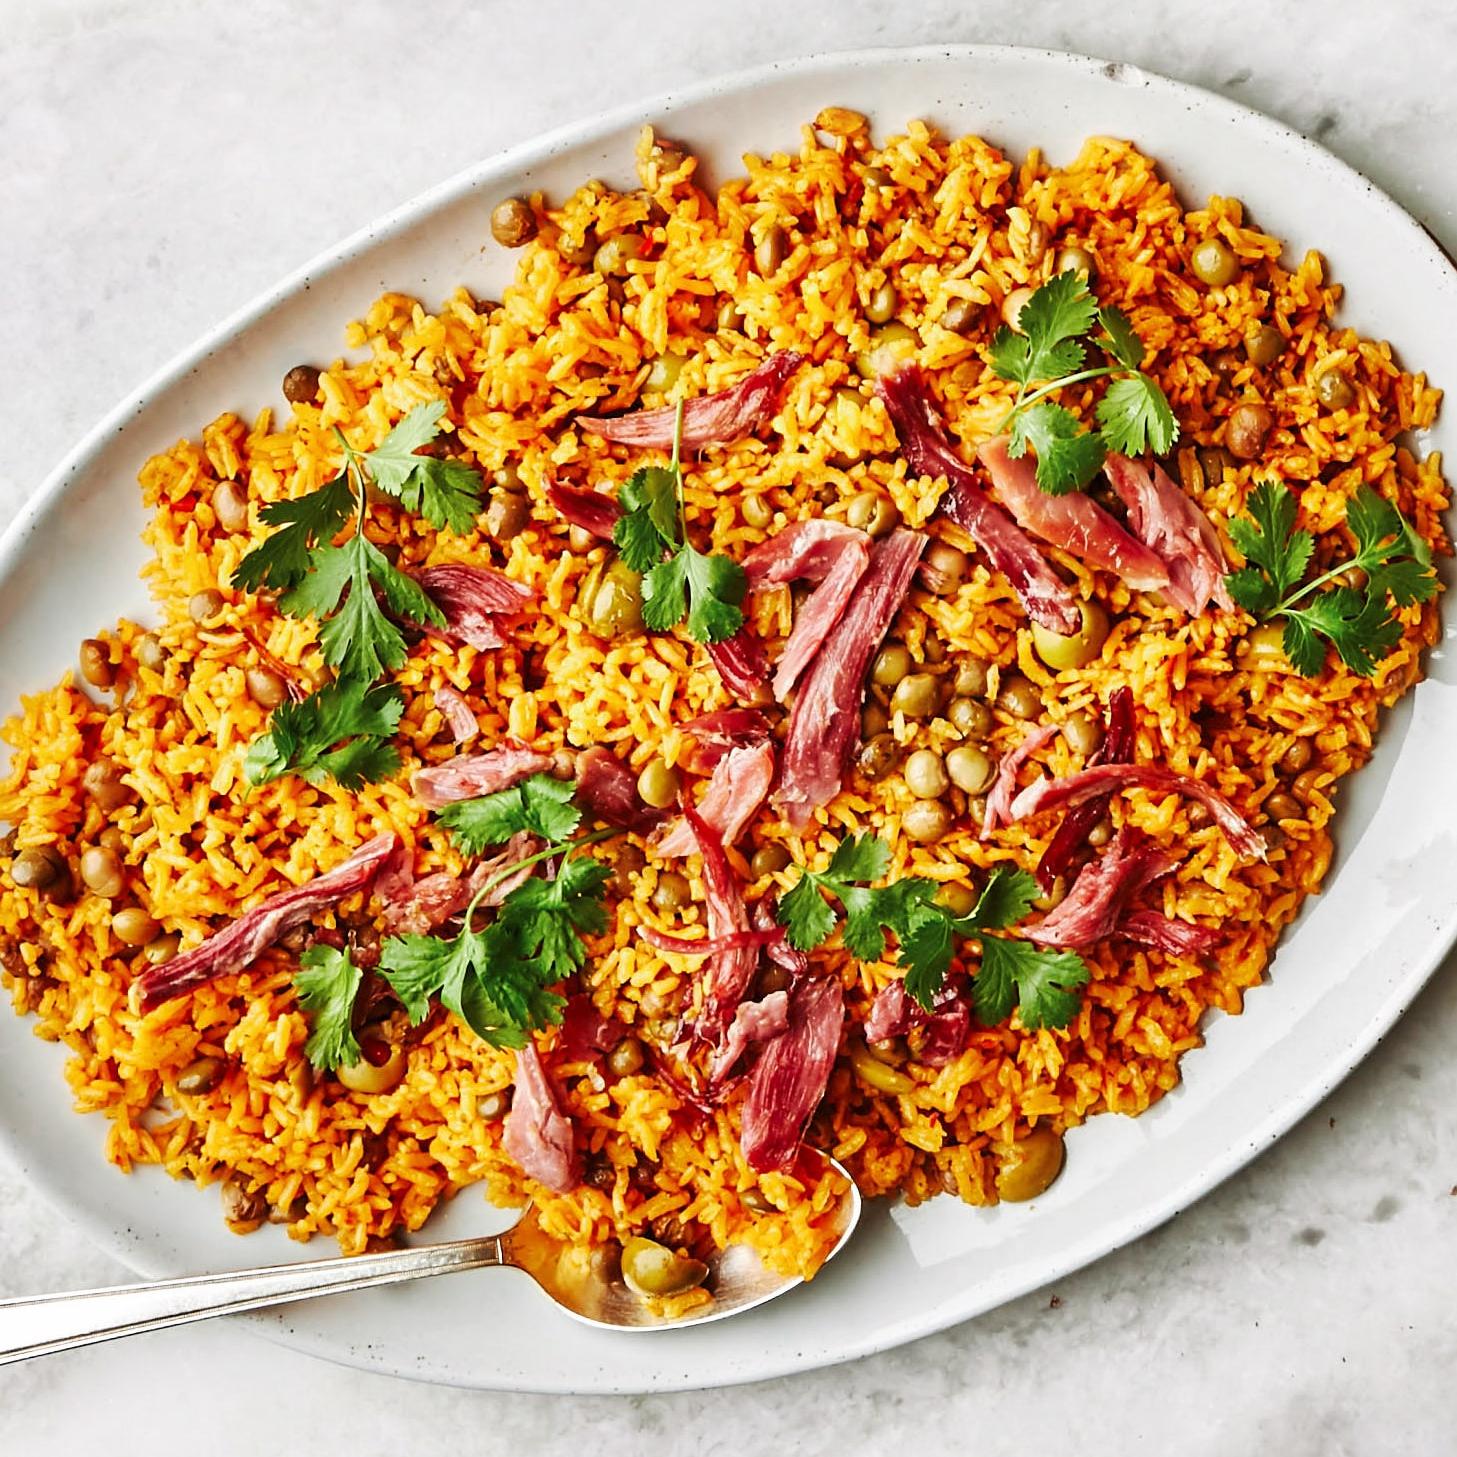  The perfect side dish for any feast, Arroz Con Gandules is flavorful and filling